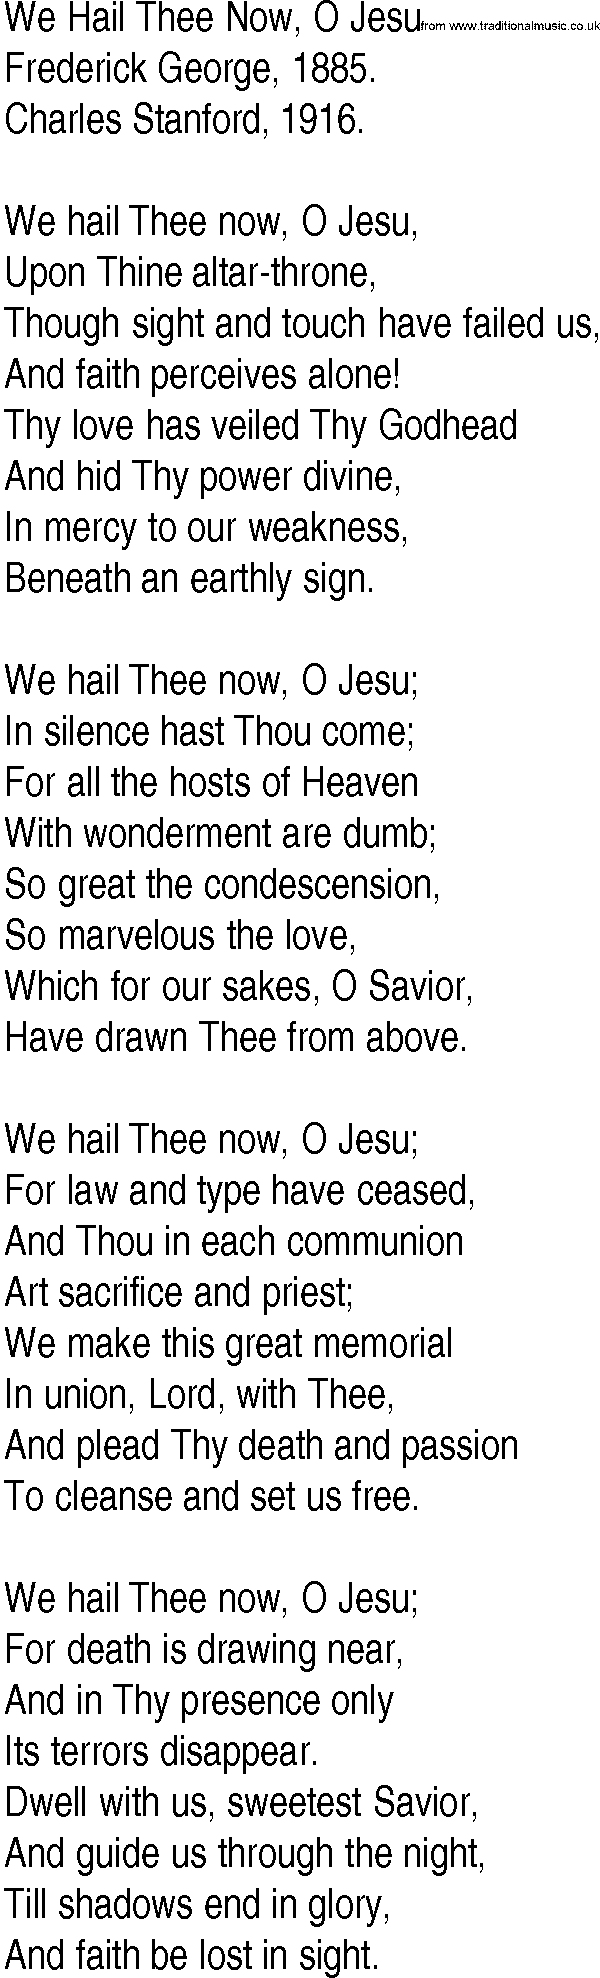 Hymn and Gospel Song: We Hail Thee Now, O Jesu by Frederick George lyrics